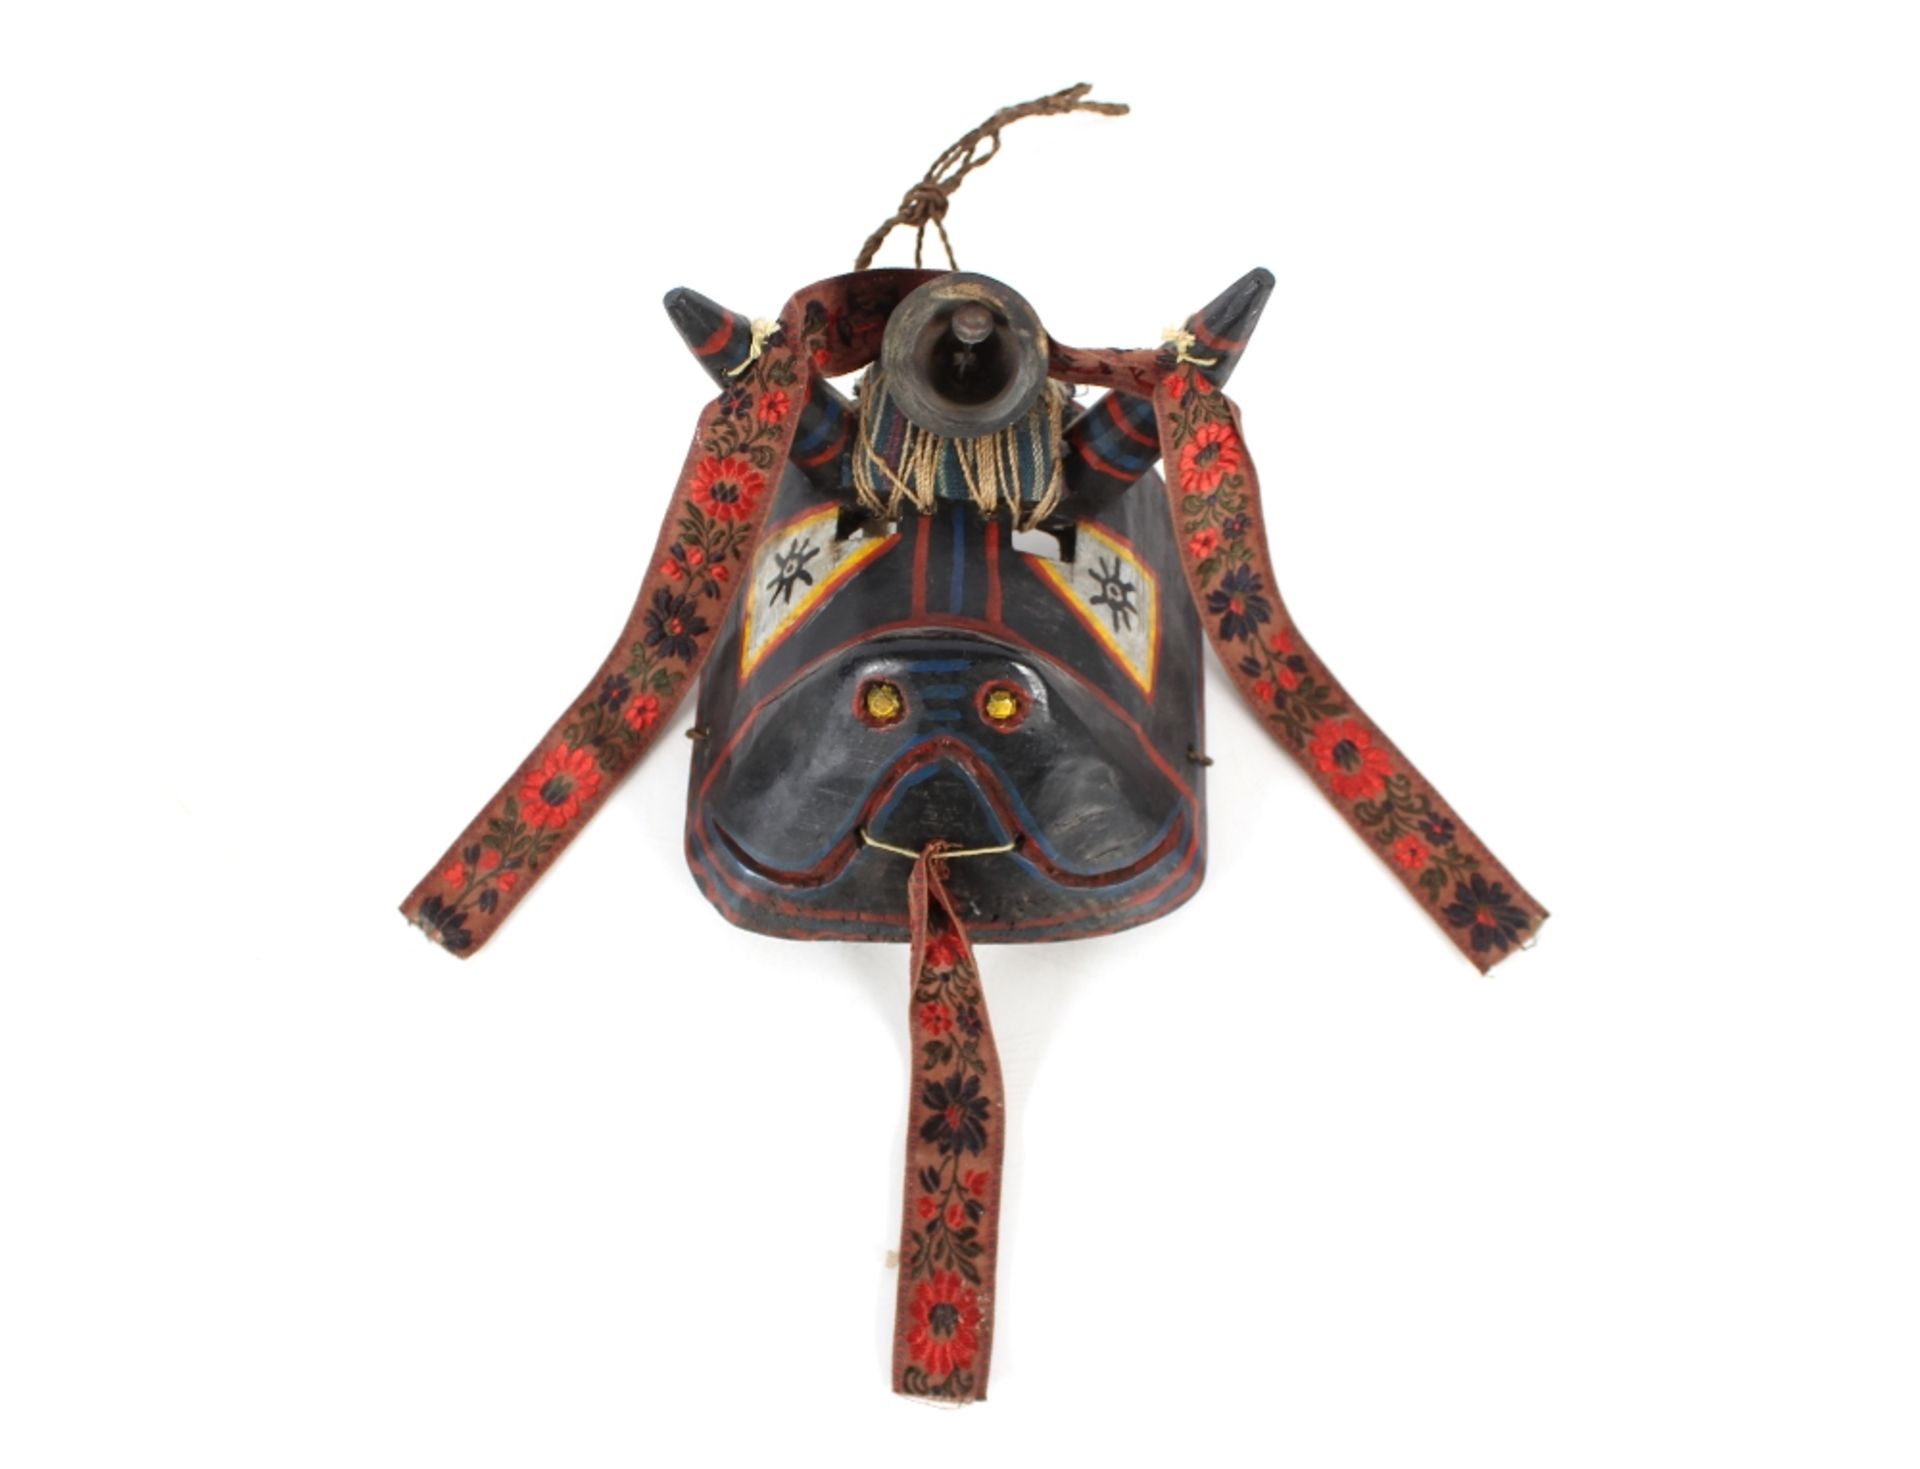 A brightly coloured Ethnic face mask, having horns supporting a central bell with brightly